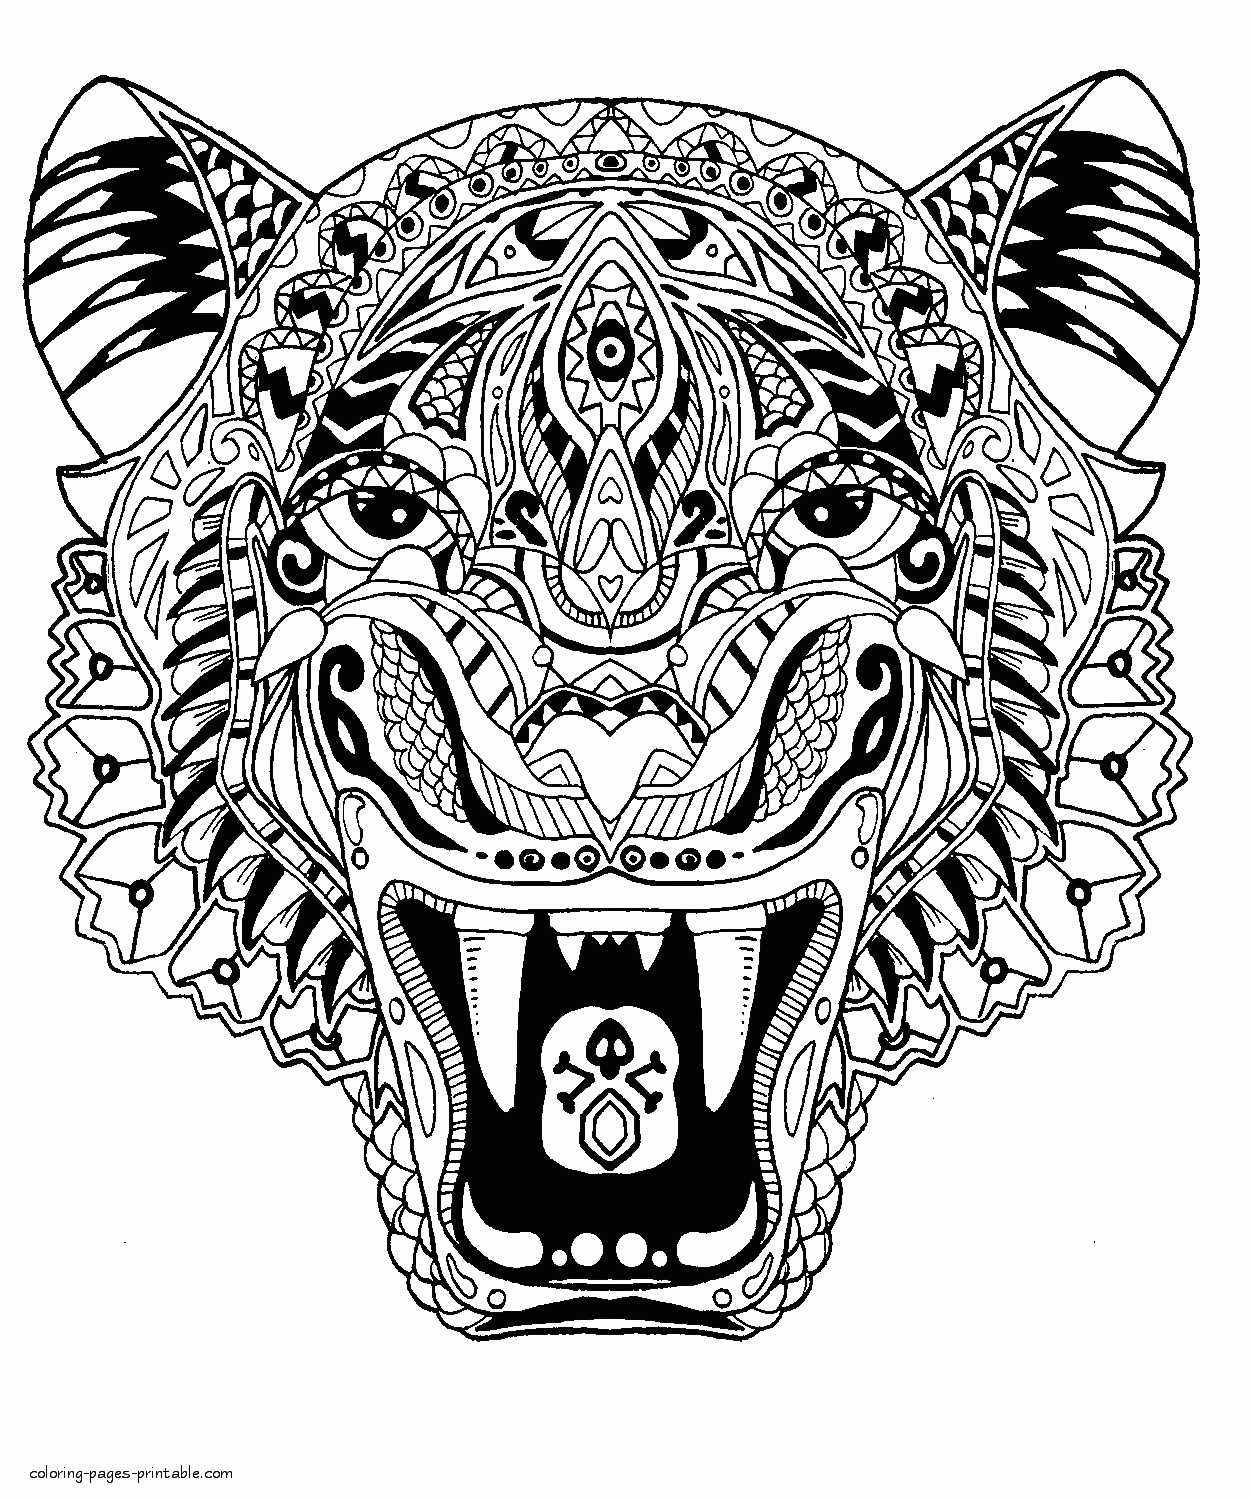 free colouring pages wild animals wild animals kids coloring pages free colouring pictures colouring free pages wild animals 